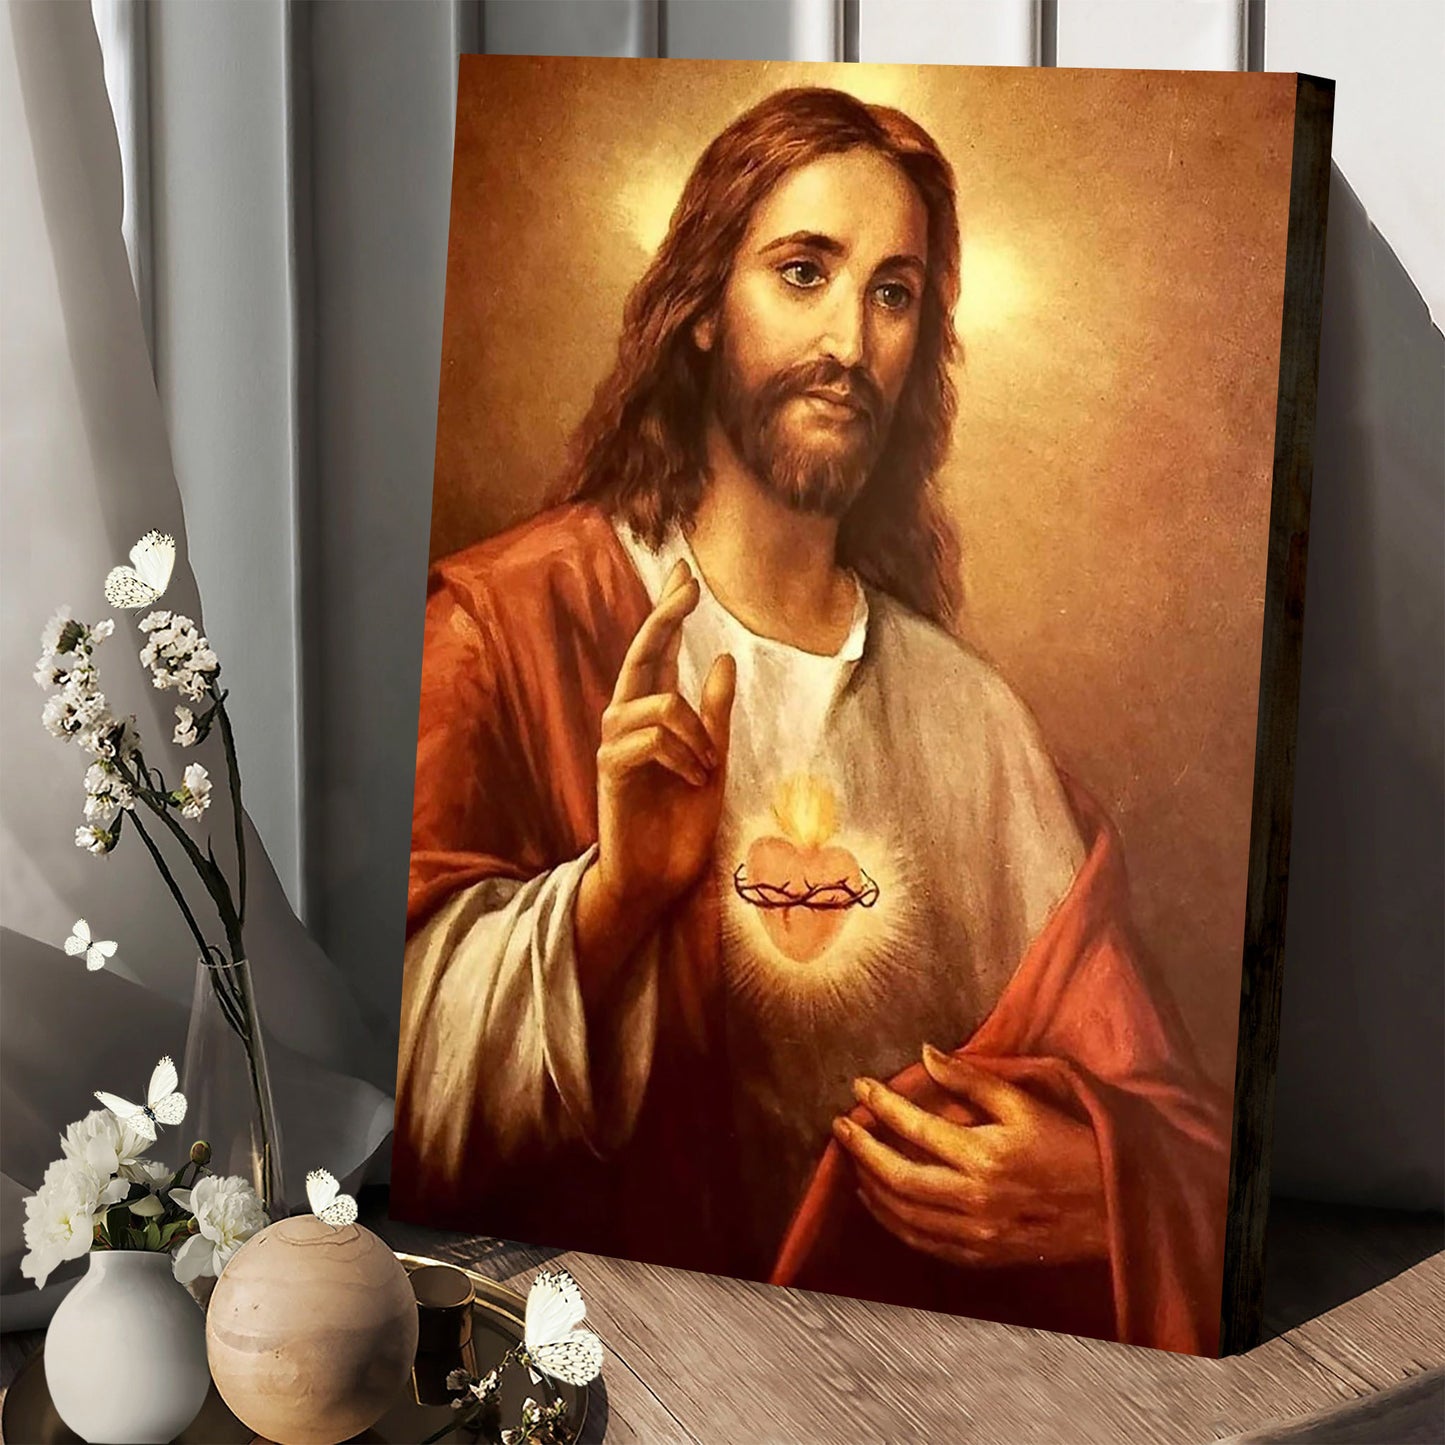 Jesus Christ Canvas Christianity - Jesus Canvas Pictures - Christian Wall Art